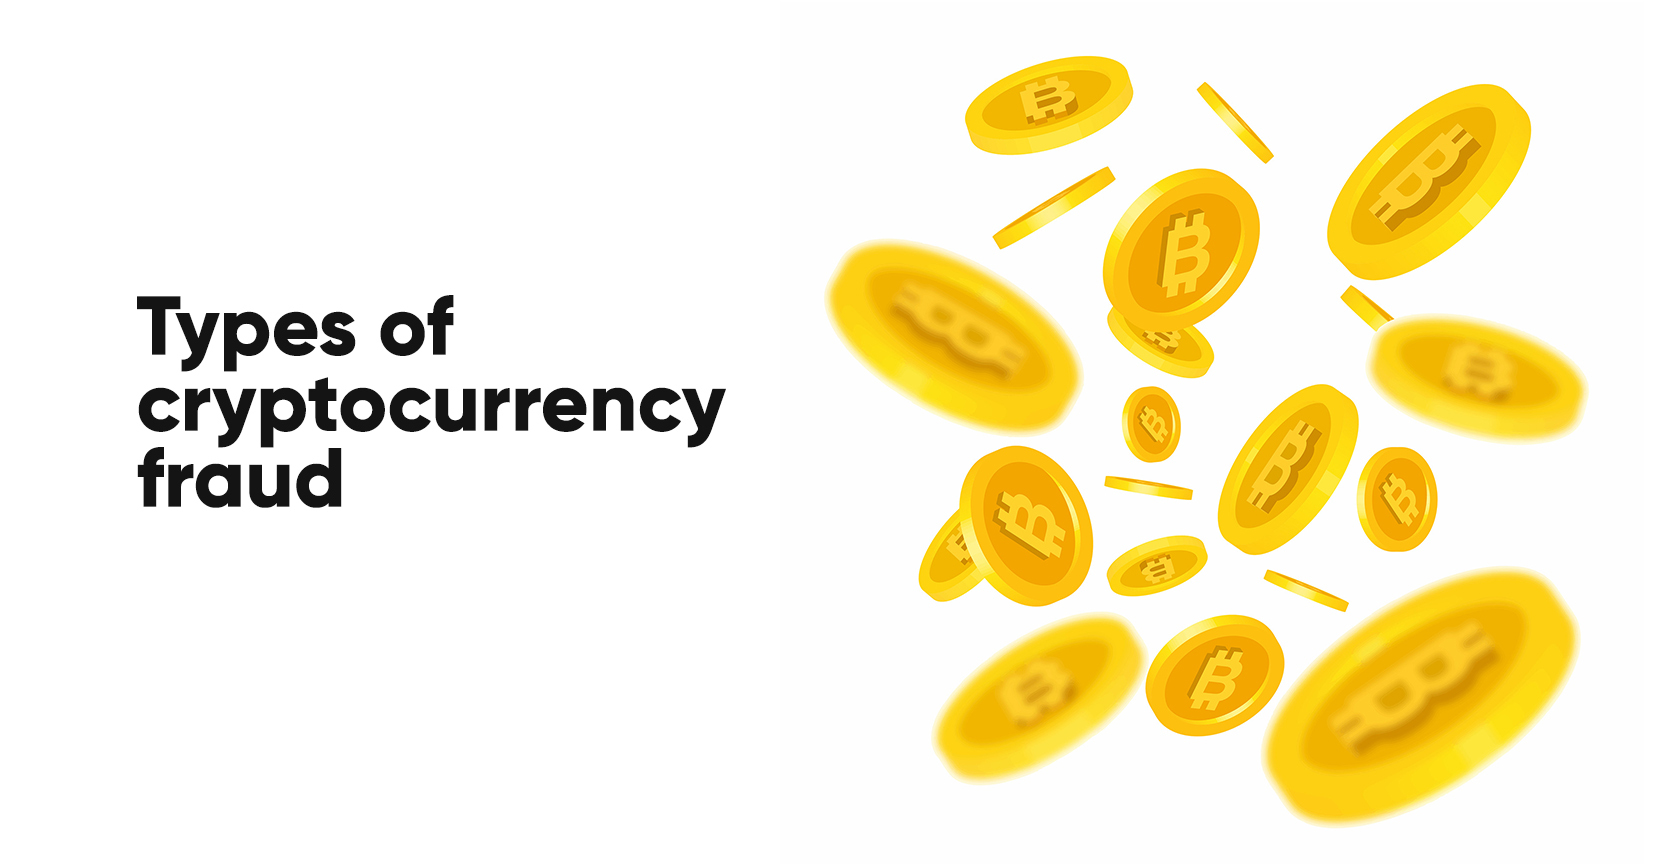 Types of cryptocurrency fraud